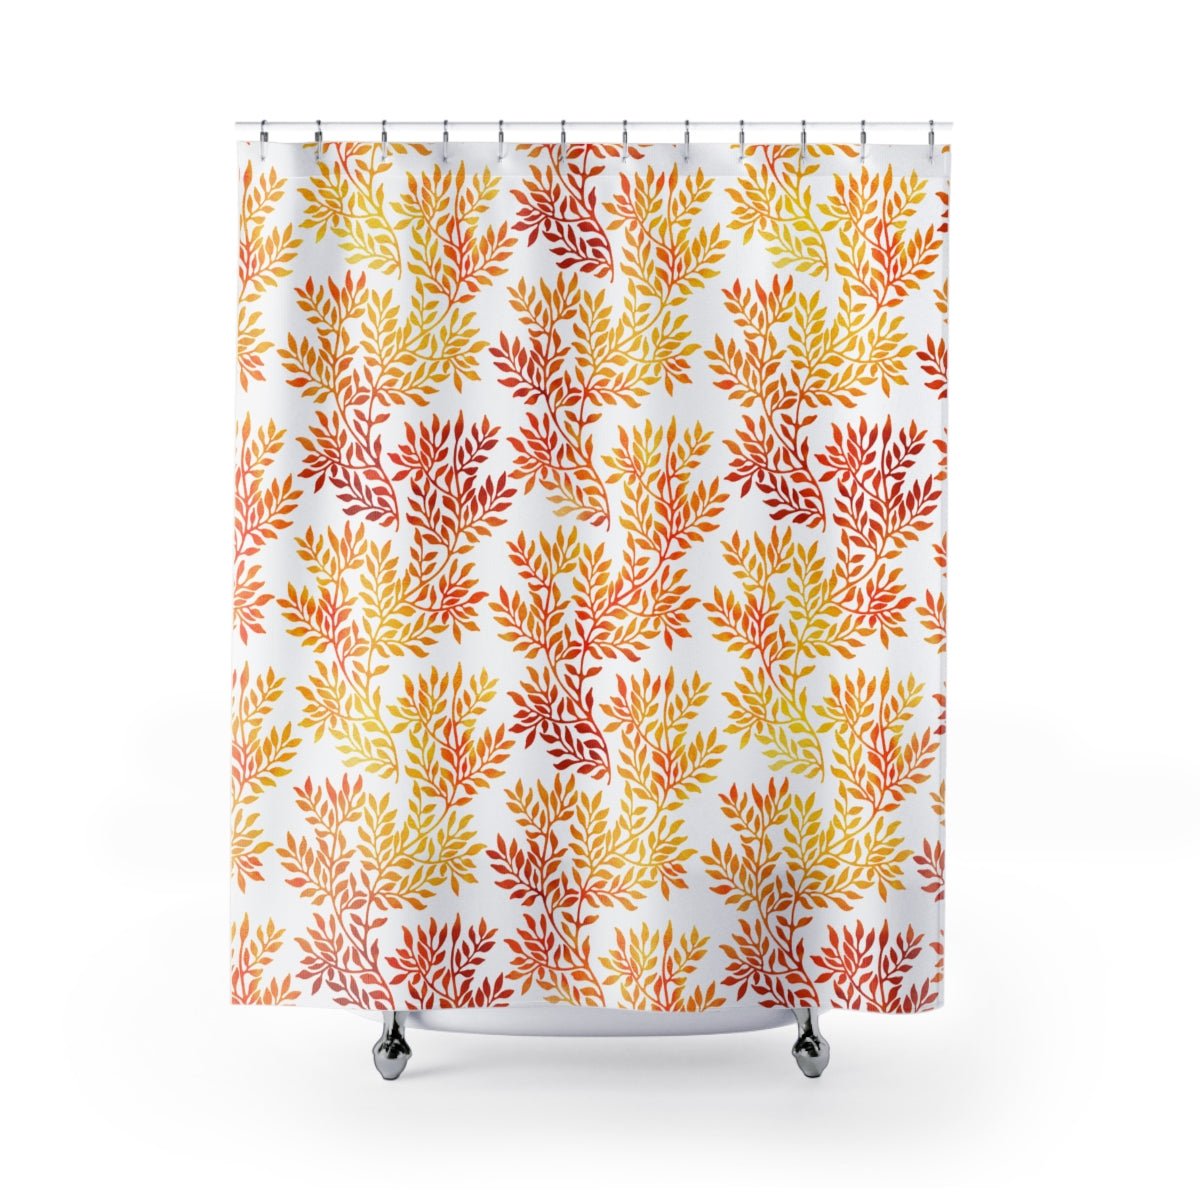 Fall Red and Orange Leaves Shower Curtain - Puffin Lime